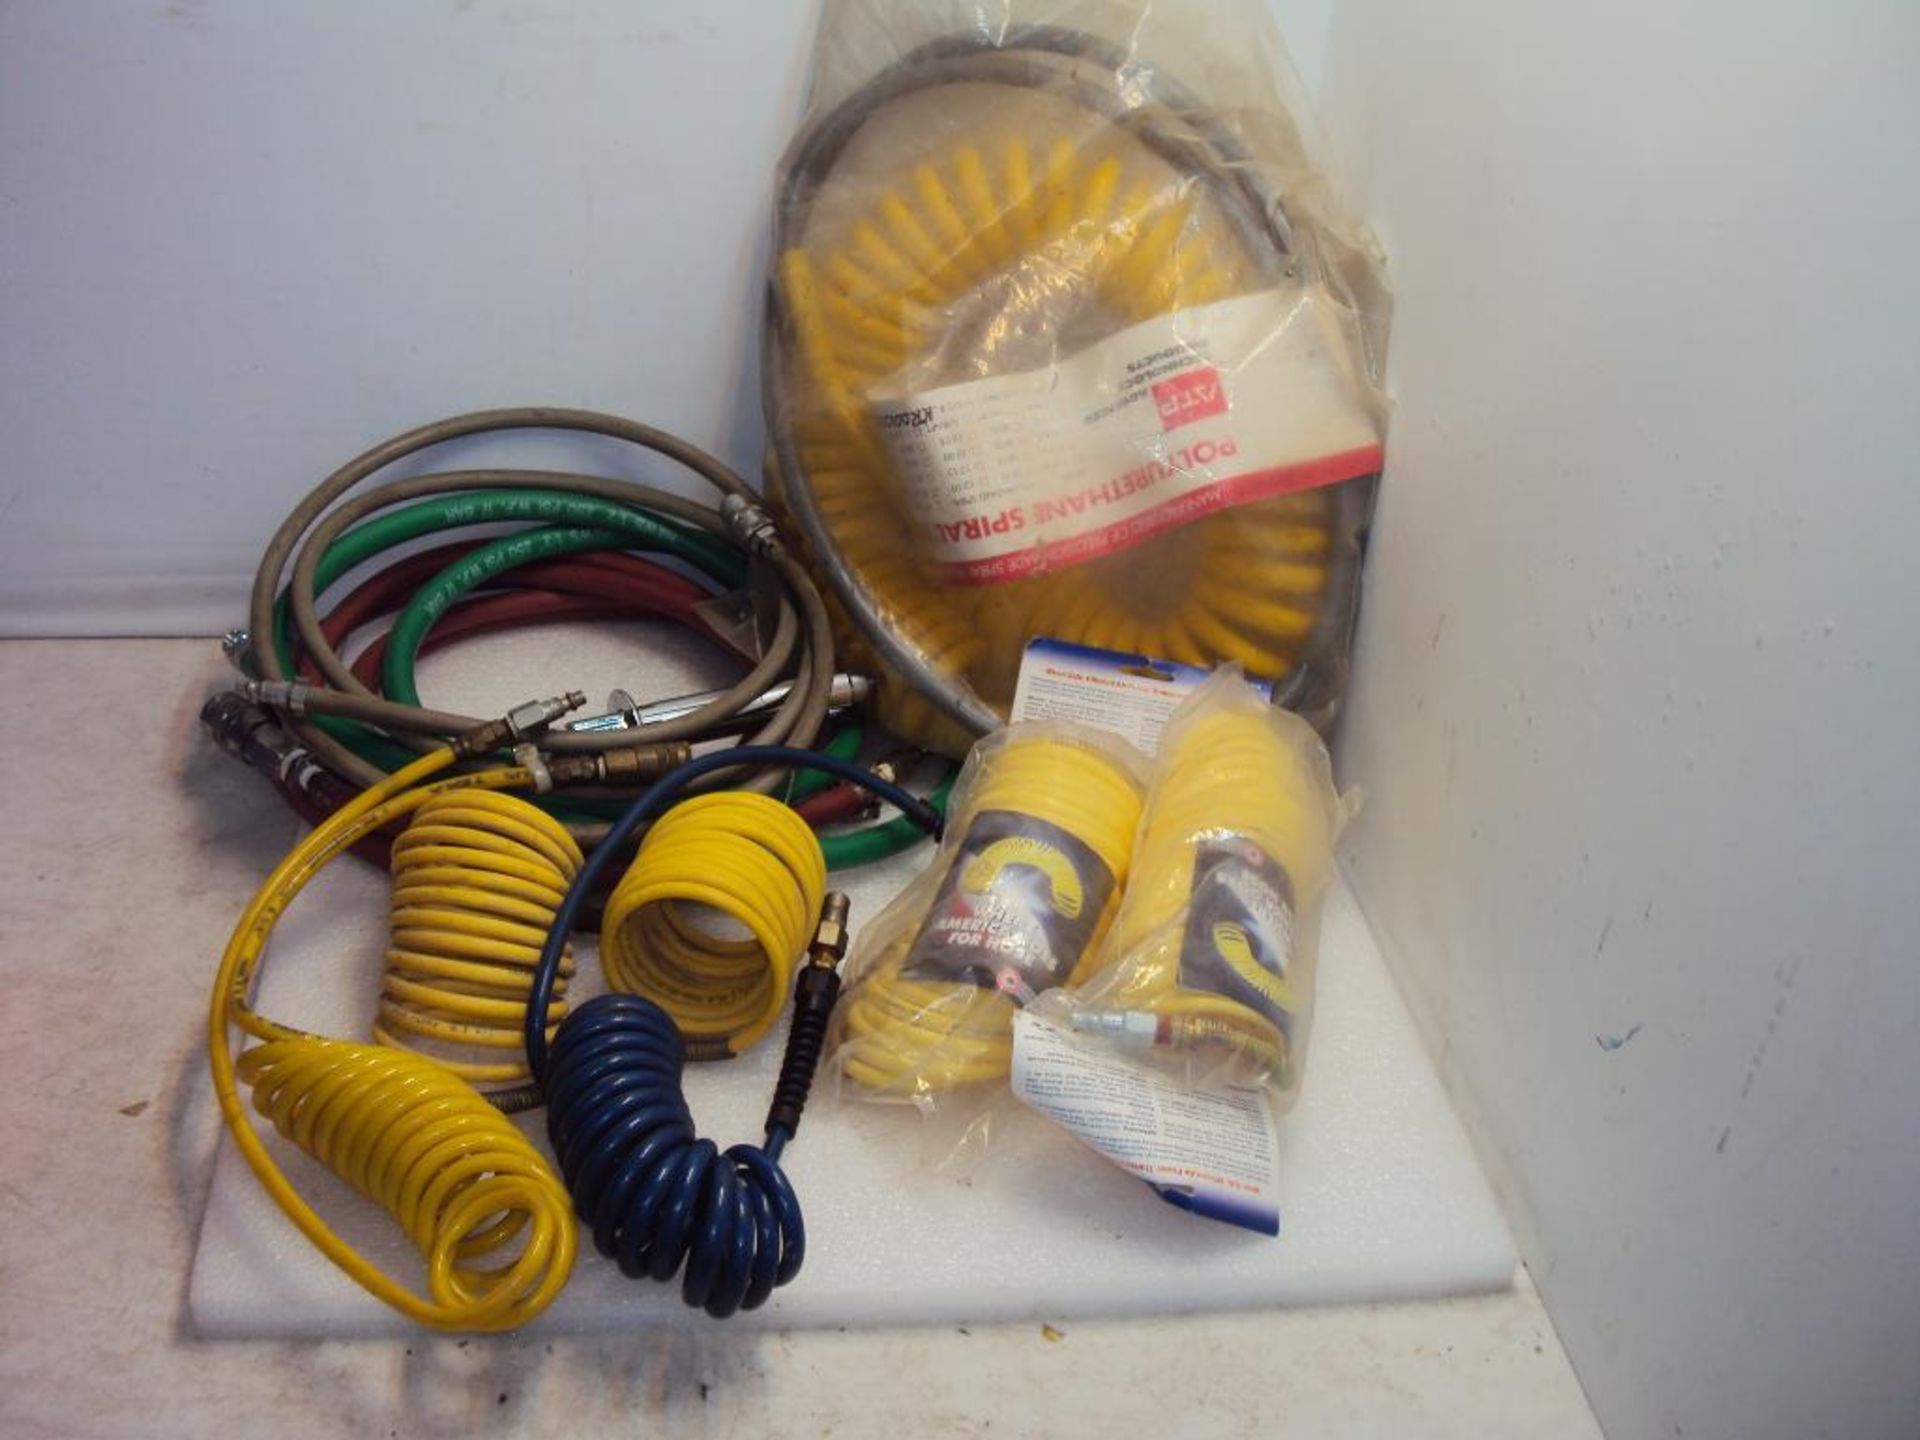 AIR HOSES IN ONE LOT